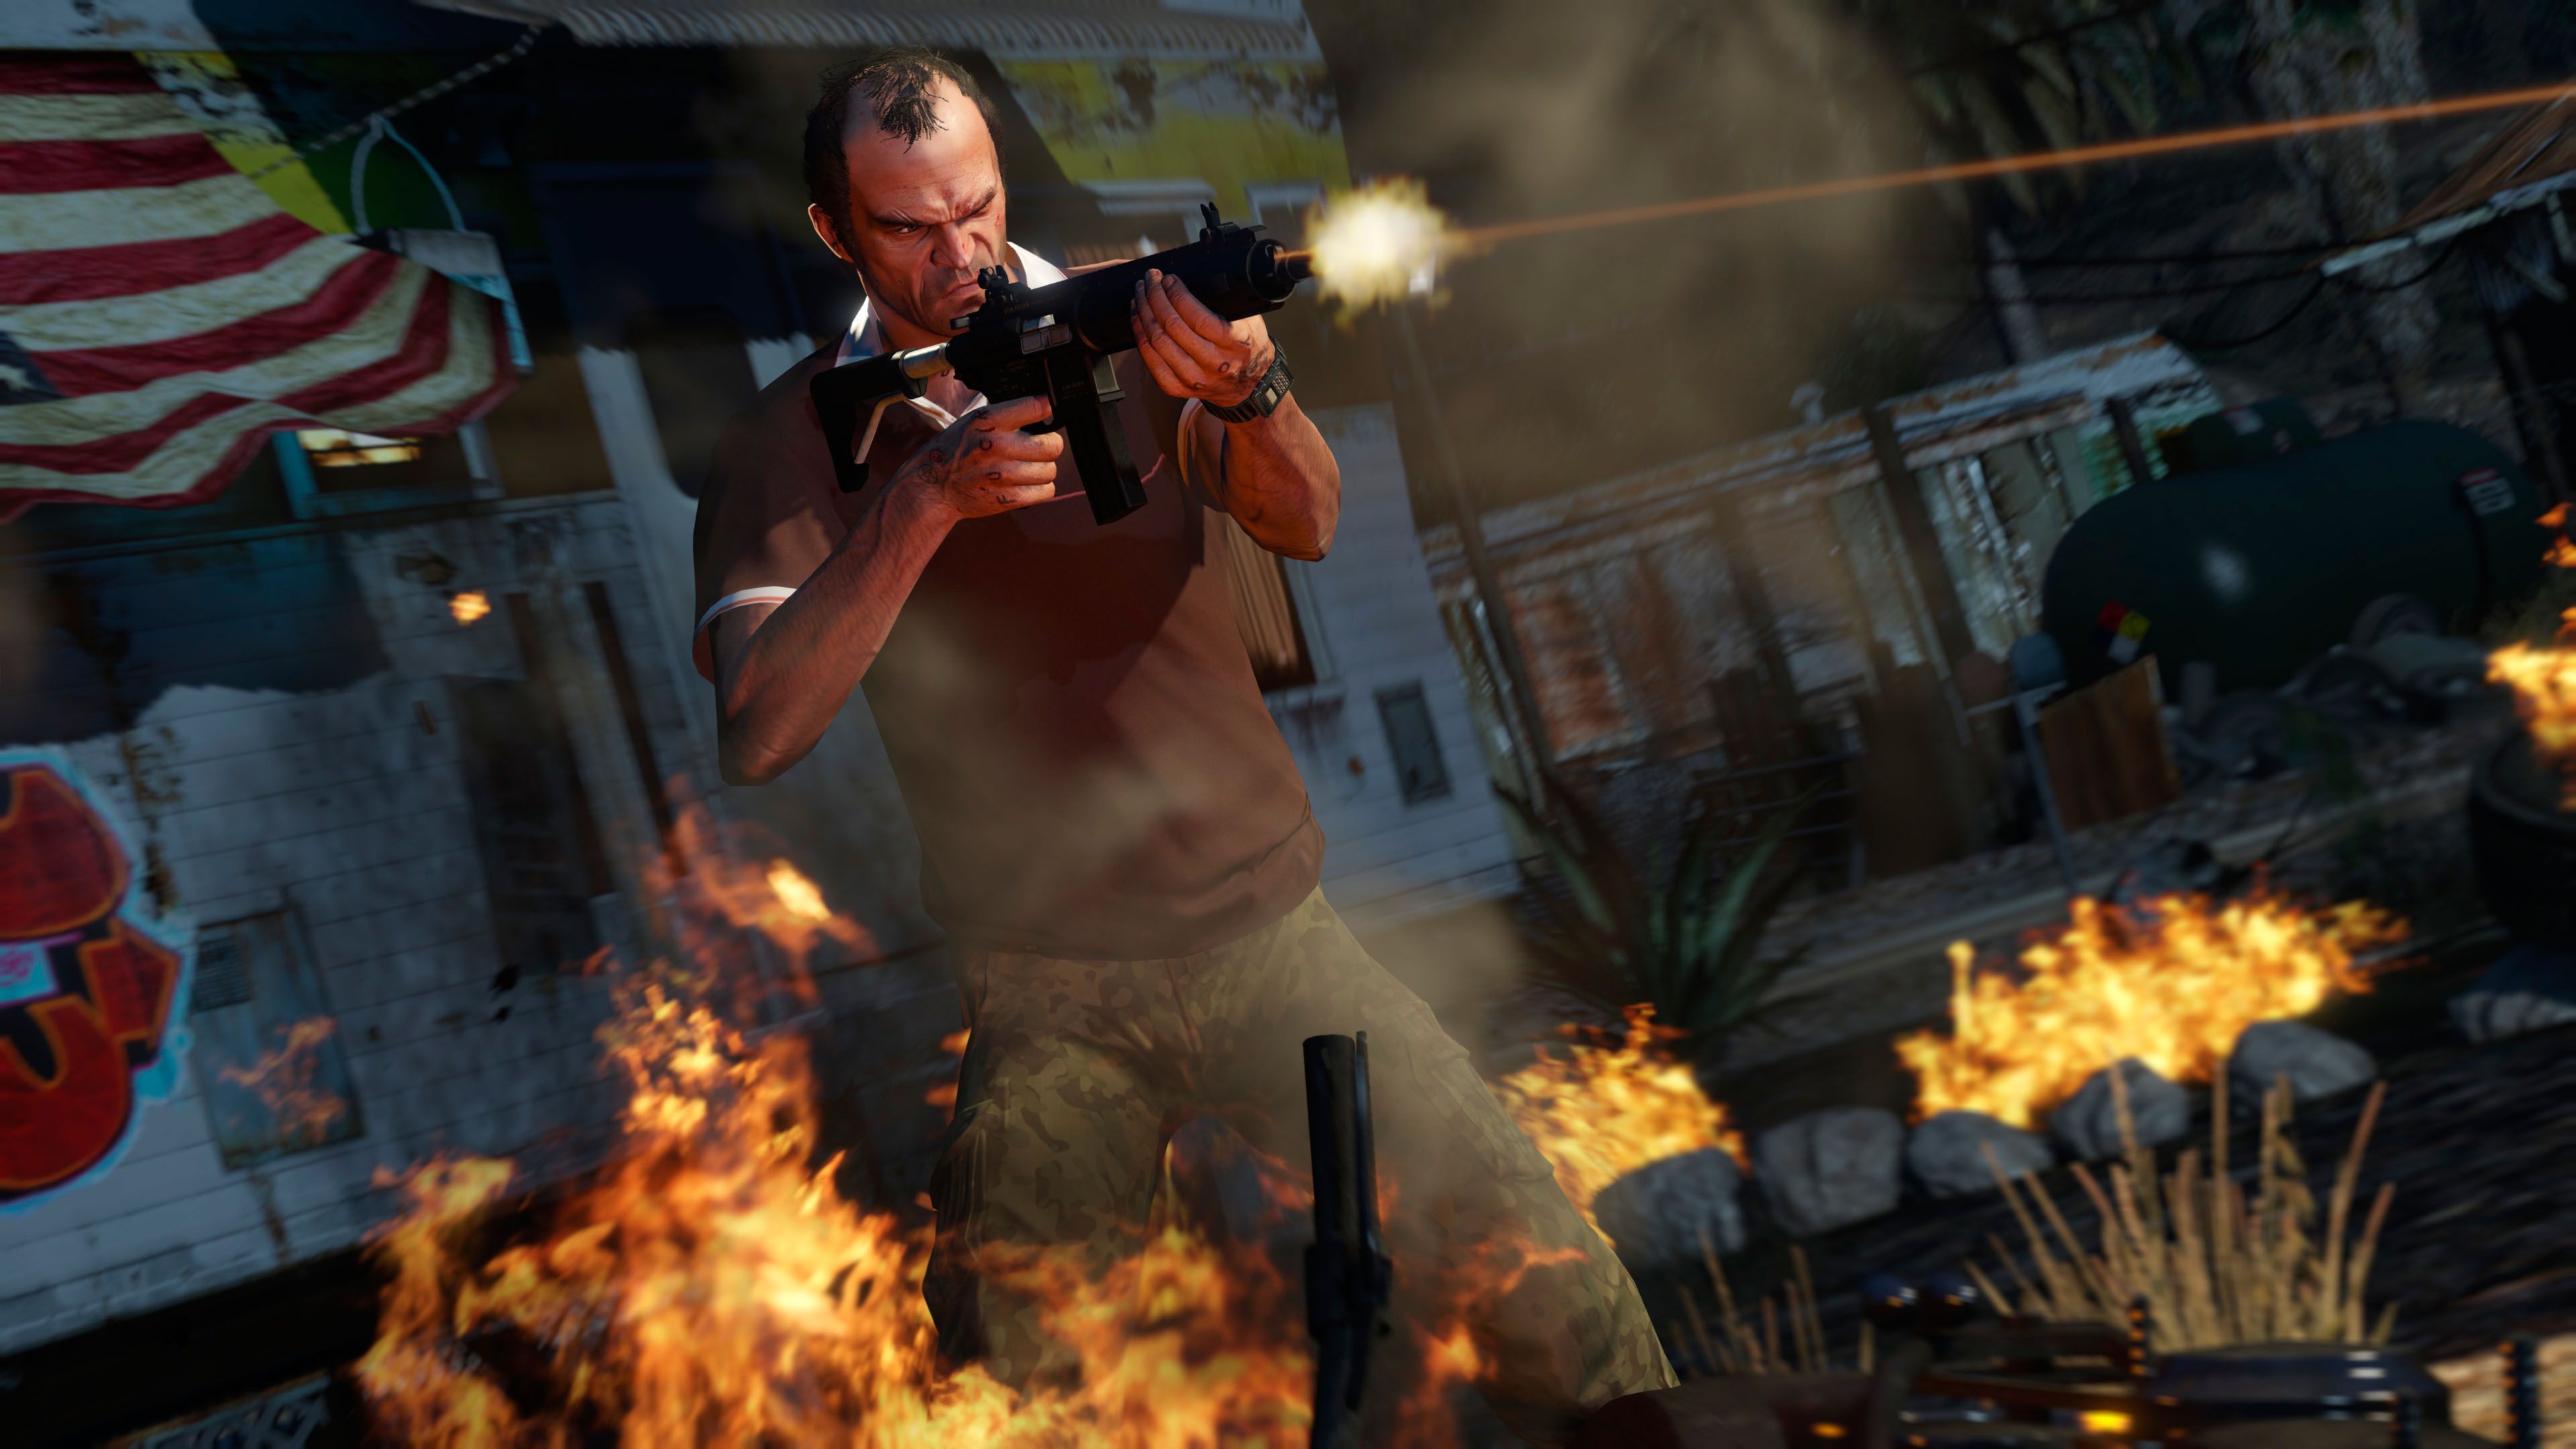 gta 5 in glorious 4k picture gallery can your pc run it find out here image 1